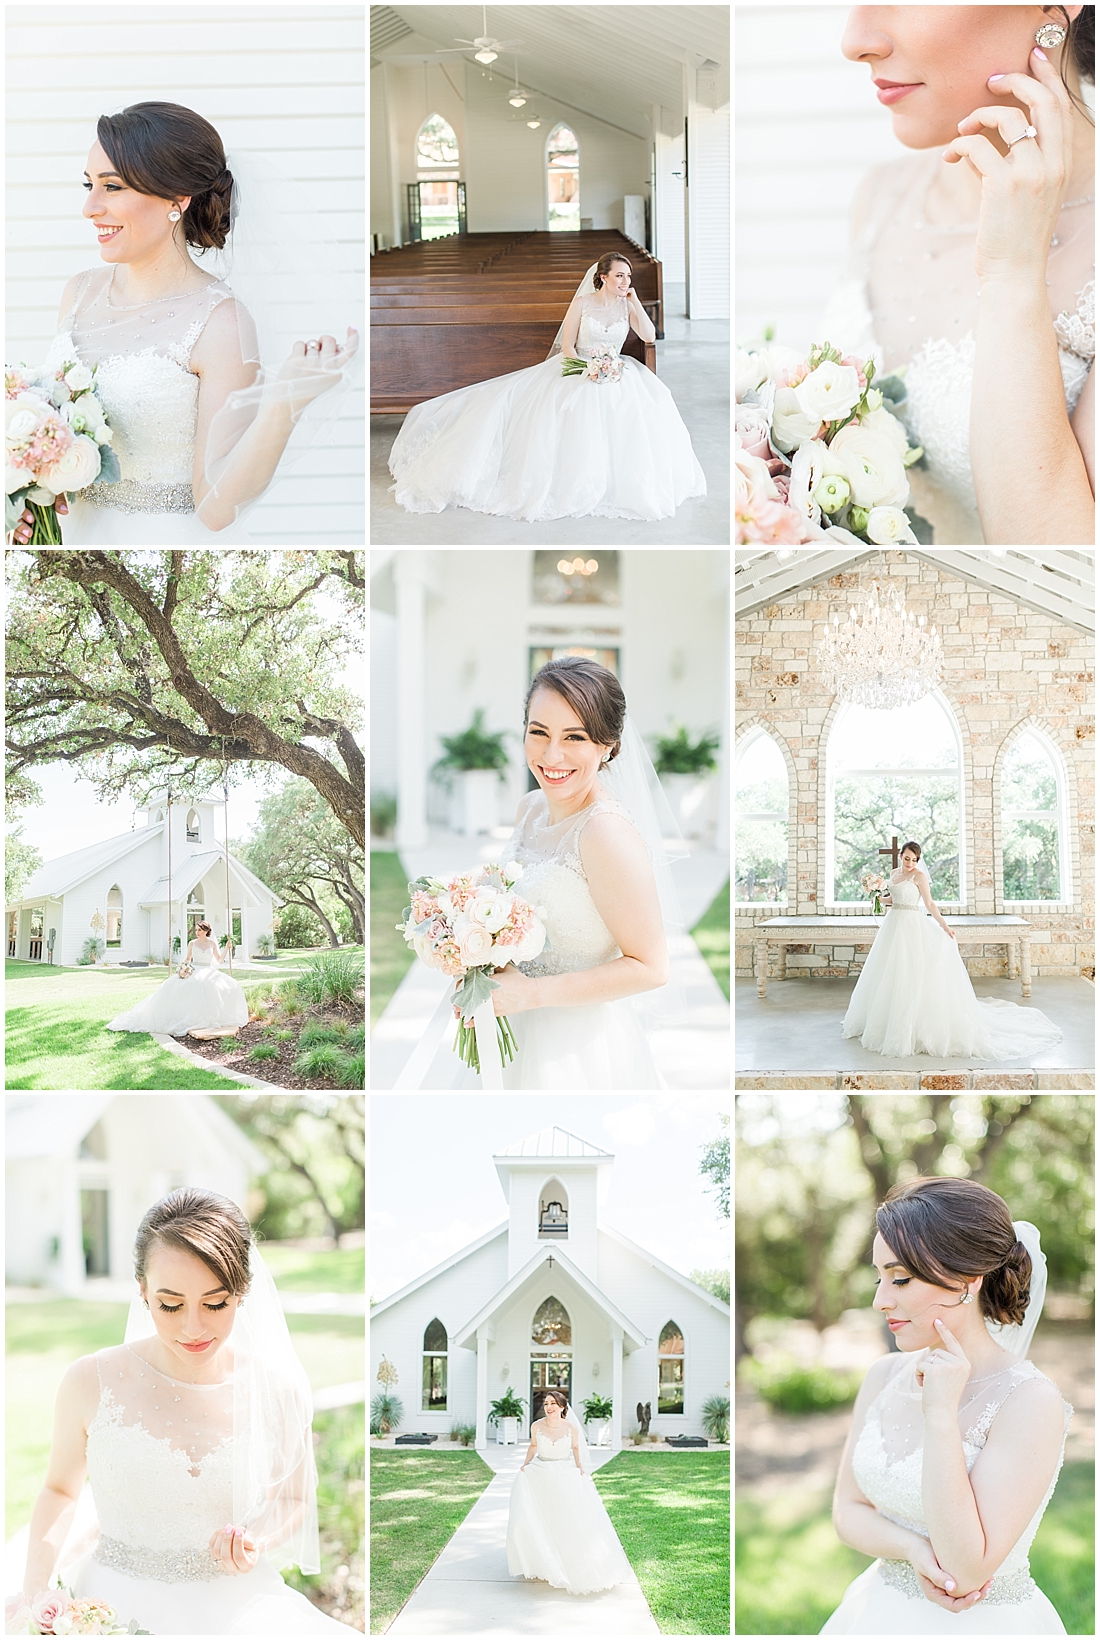 A Summer Bridal Photo Session at The Chandelier of Gruene in New Braunfels Texas By Allison Jeffers Wedding Photography 0031